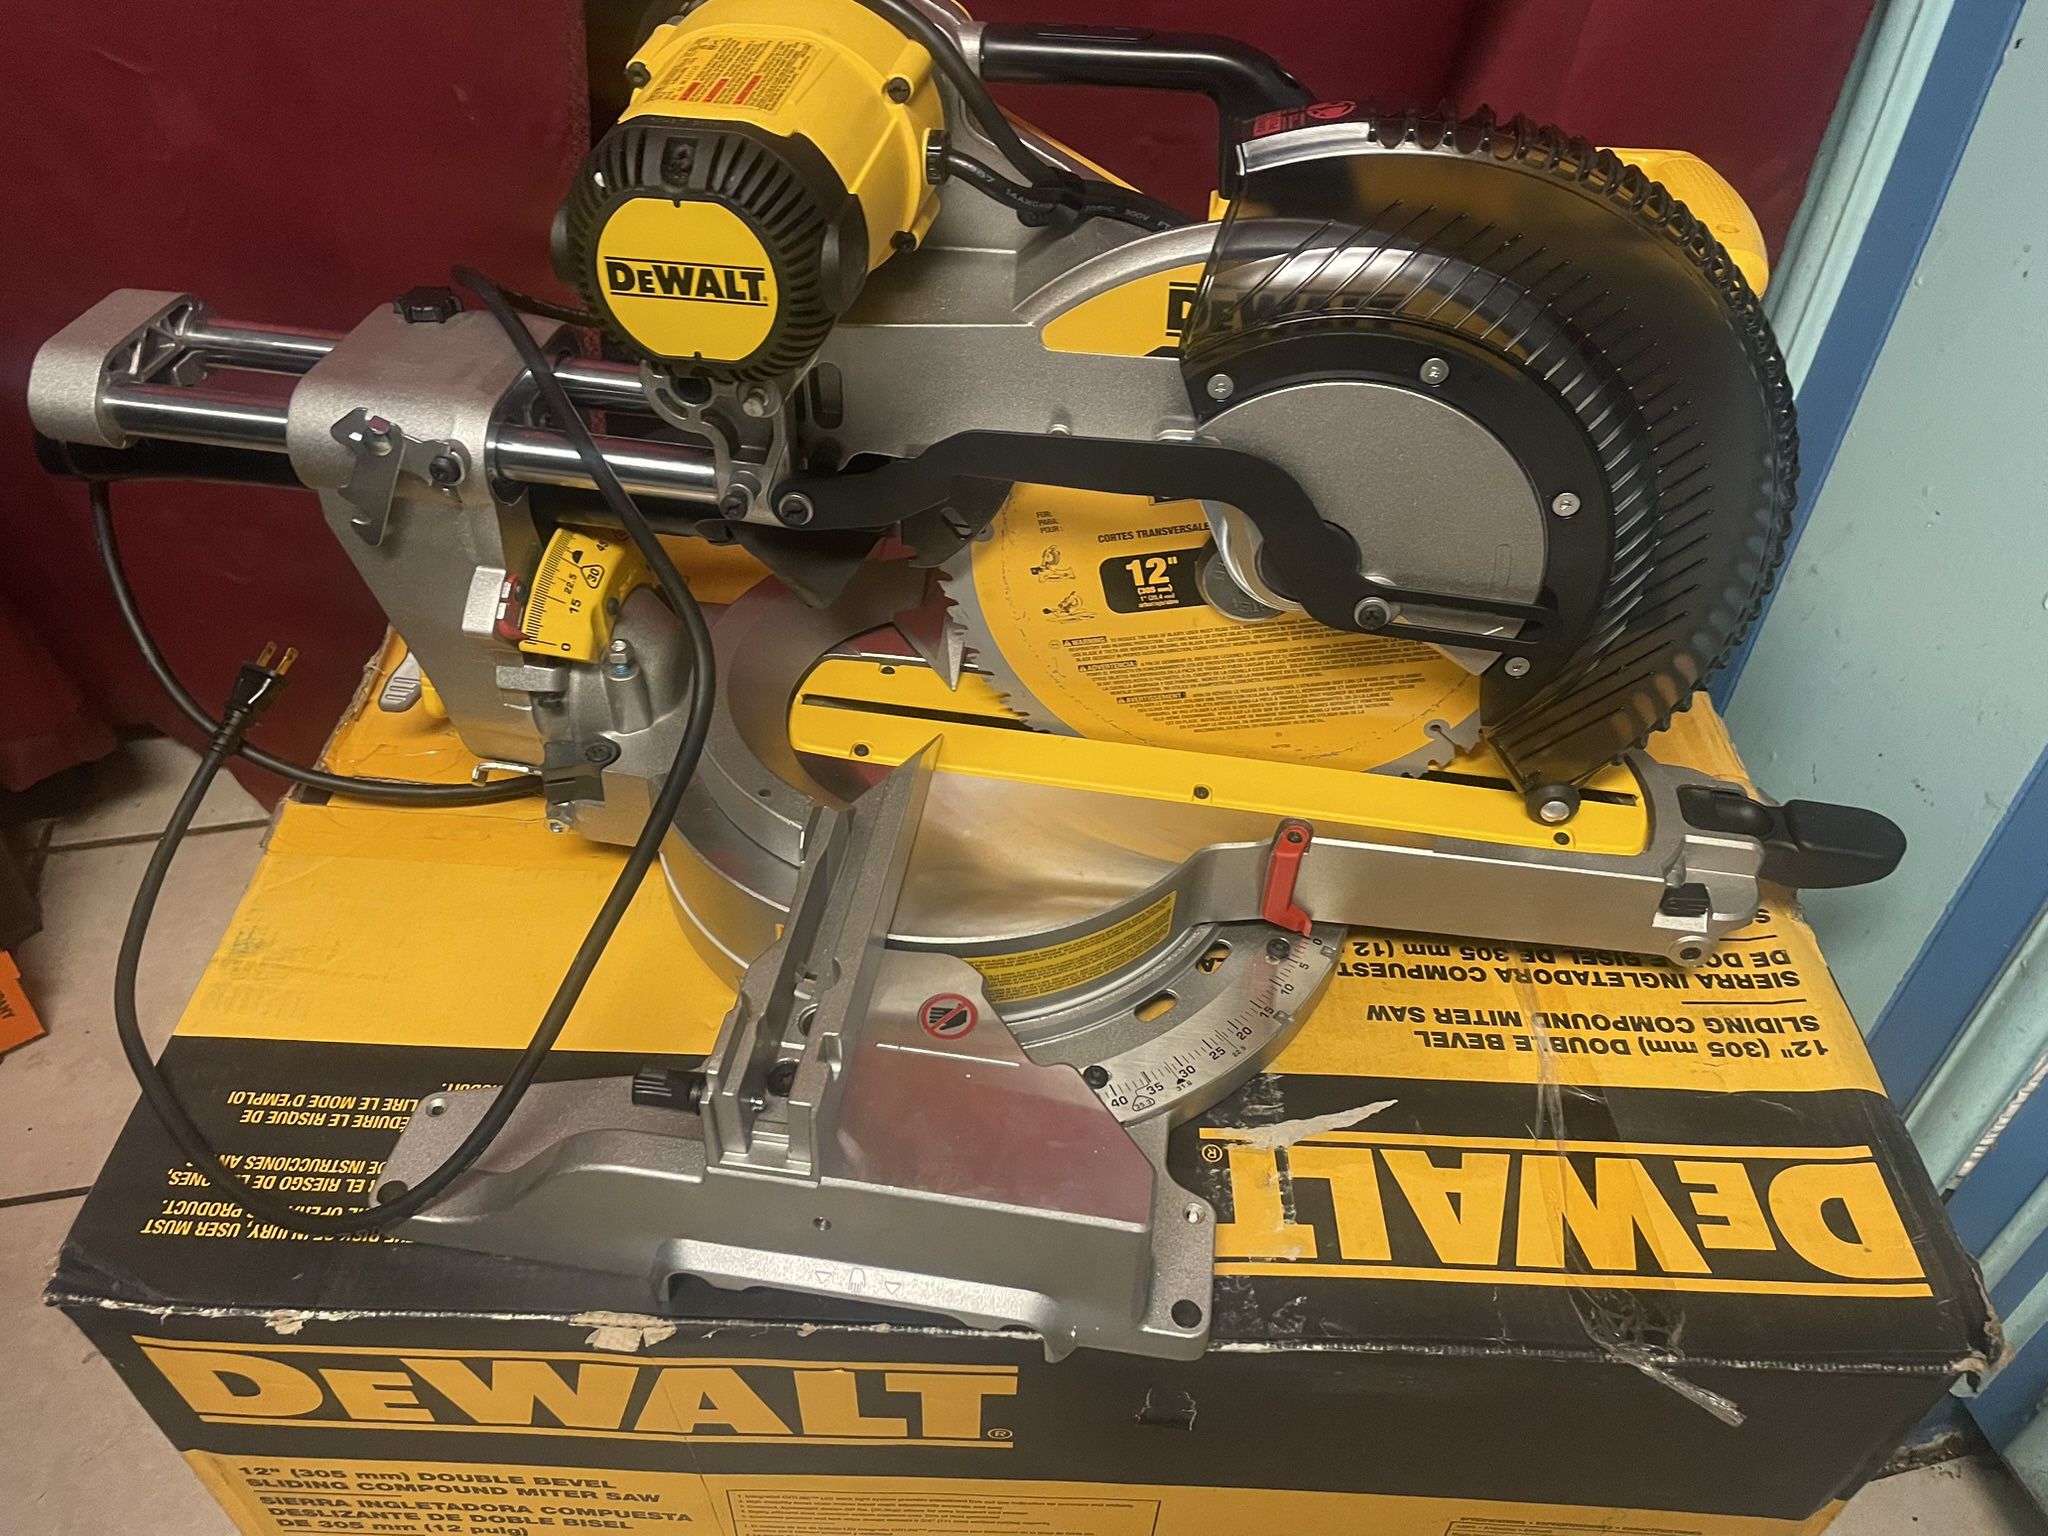 DEWALT 15 Amp Corded 12 in. Double Bevel Sliding Compound Miter Saw with XPS technology, Blade Wrench and Material Clamp